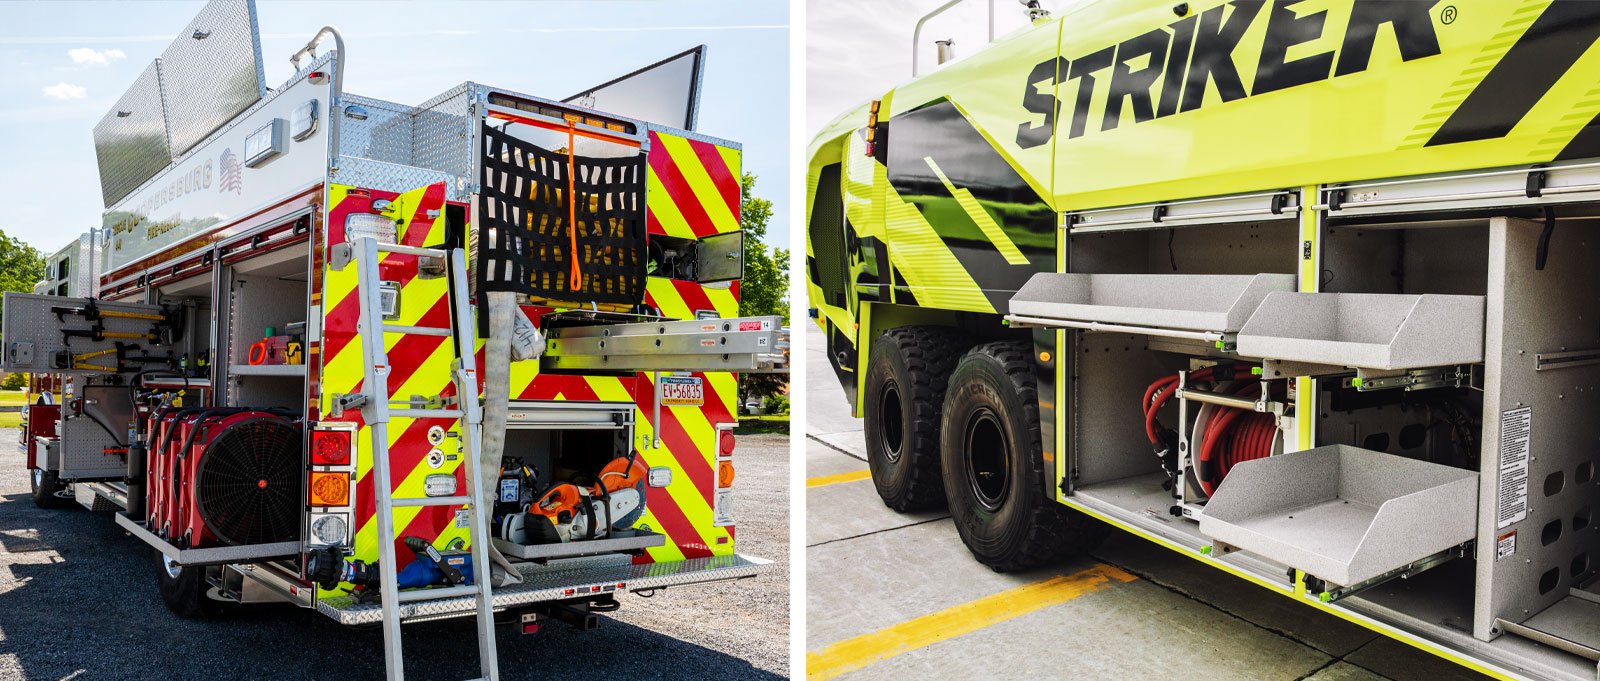 : A side-by-side image of a municipal fire truck and a Striker airport fire truck shows the differences in compartment placement and space. 